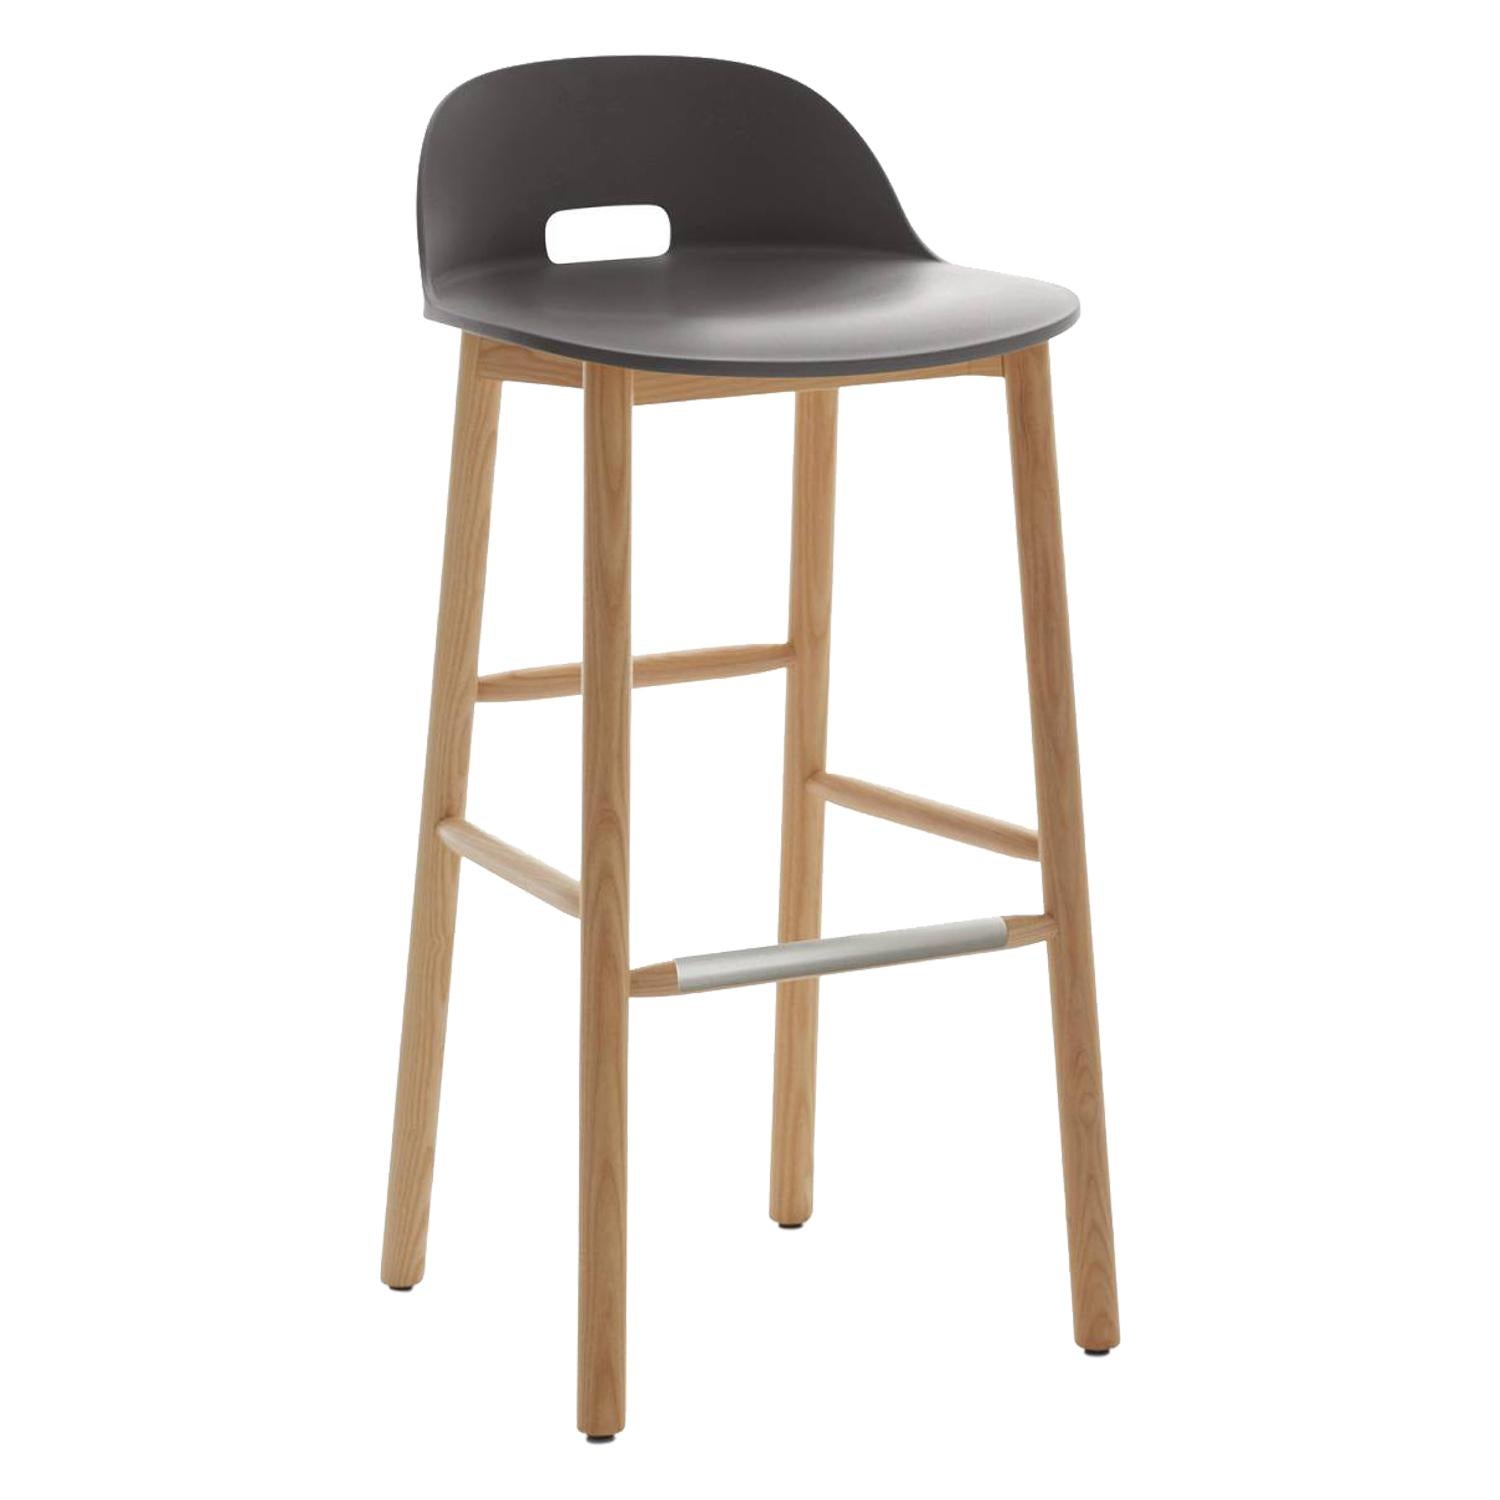 Emeco Alfi Barstool in Gray and Ash with Low Back by Jasper Morrison